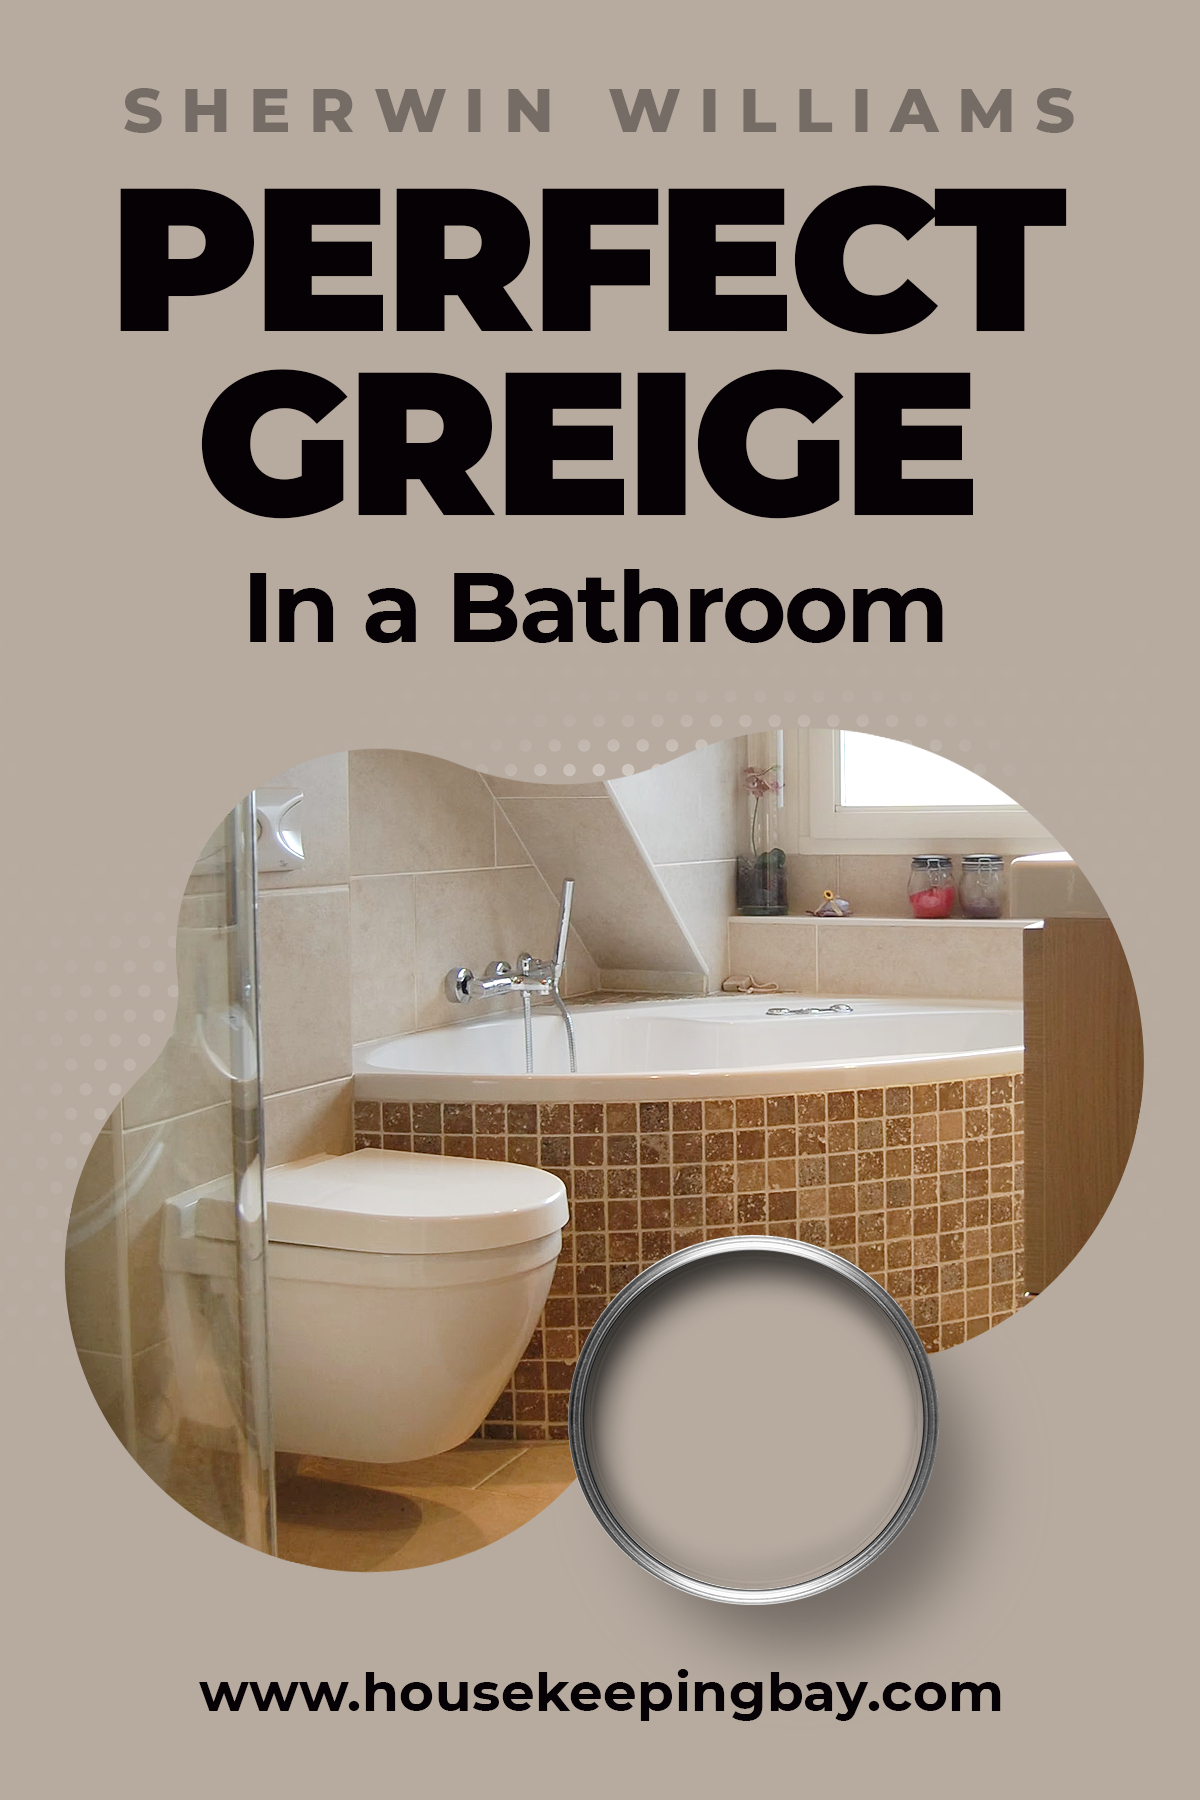 SW Perfect Greige In a Bathroom